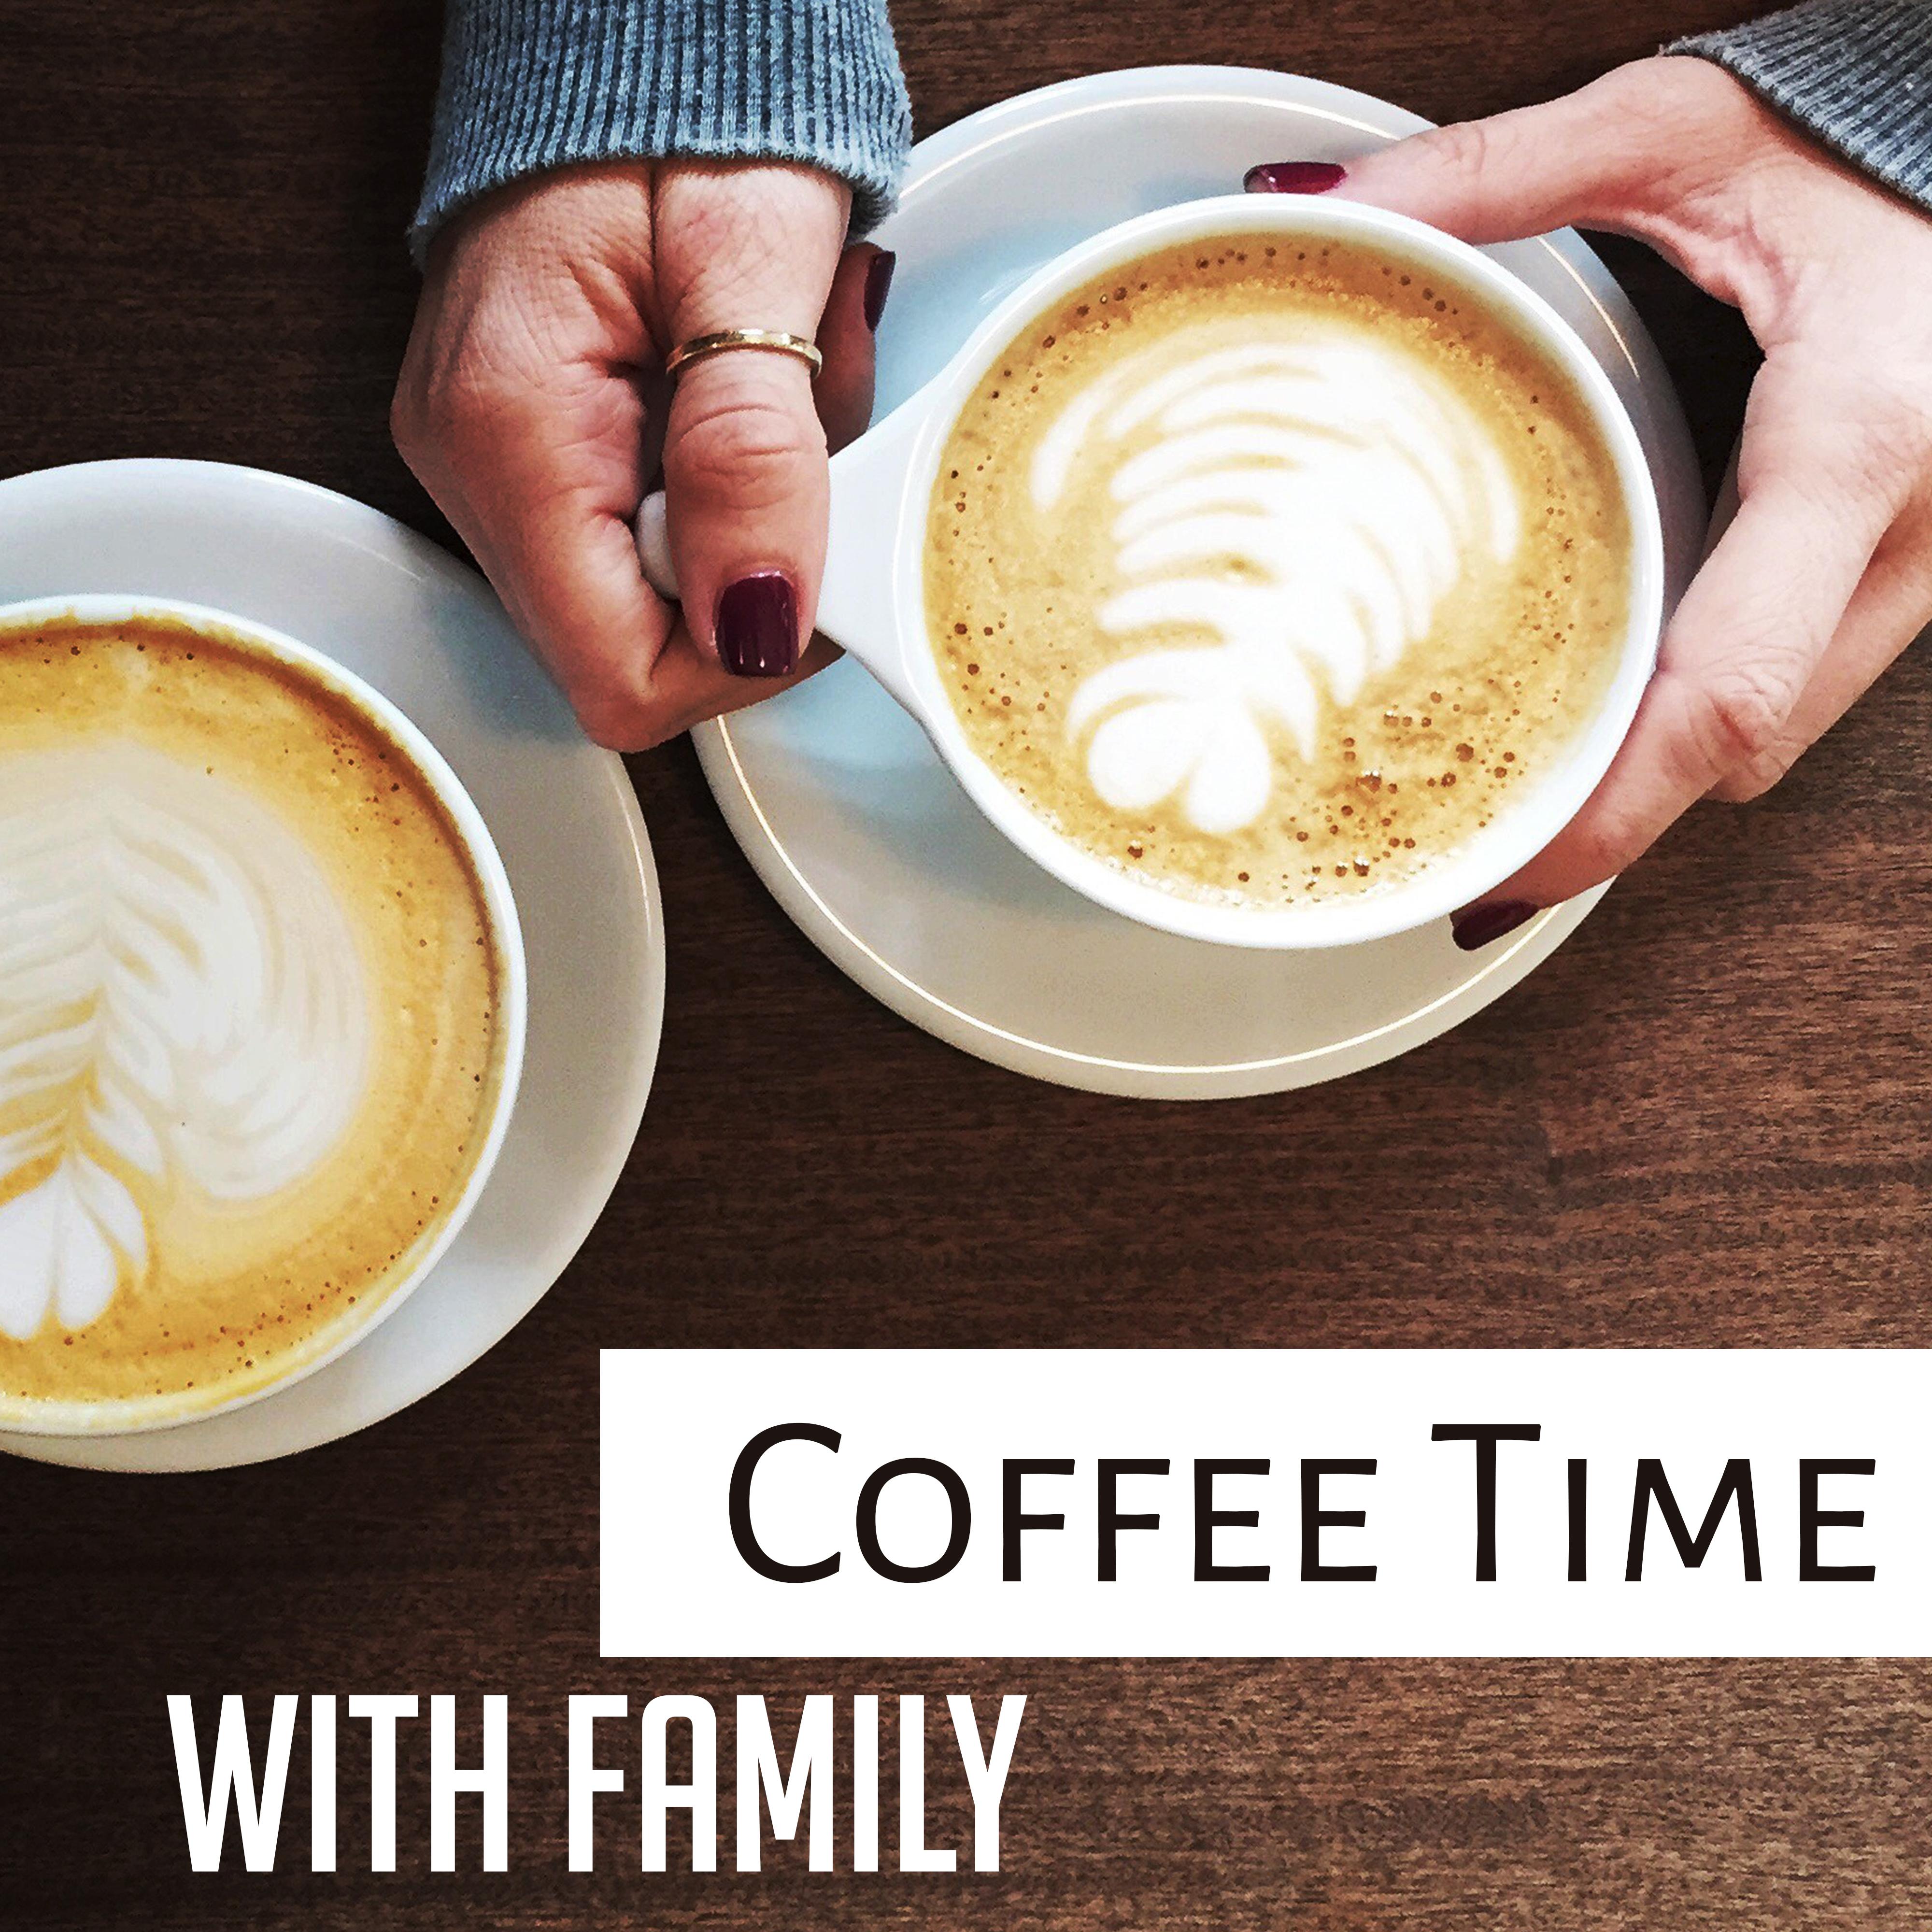 Coffee Time with Family – Jazz Cafe, Piano Bar, Best Smooth Jazz for Relaxation, Chilled Jazz, Instrumental Songs to Rest